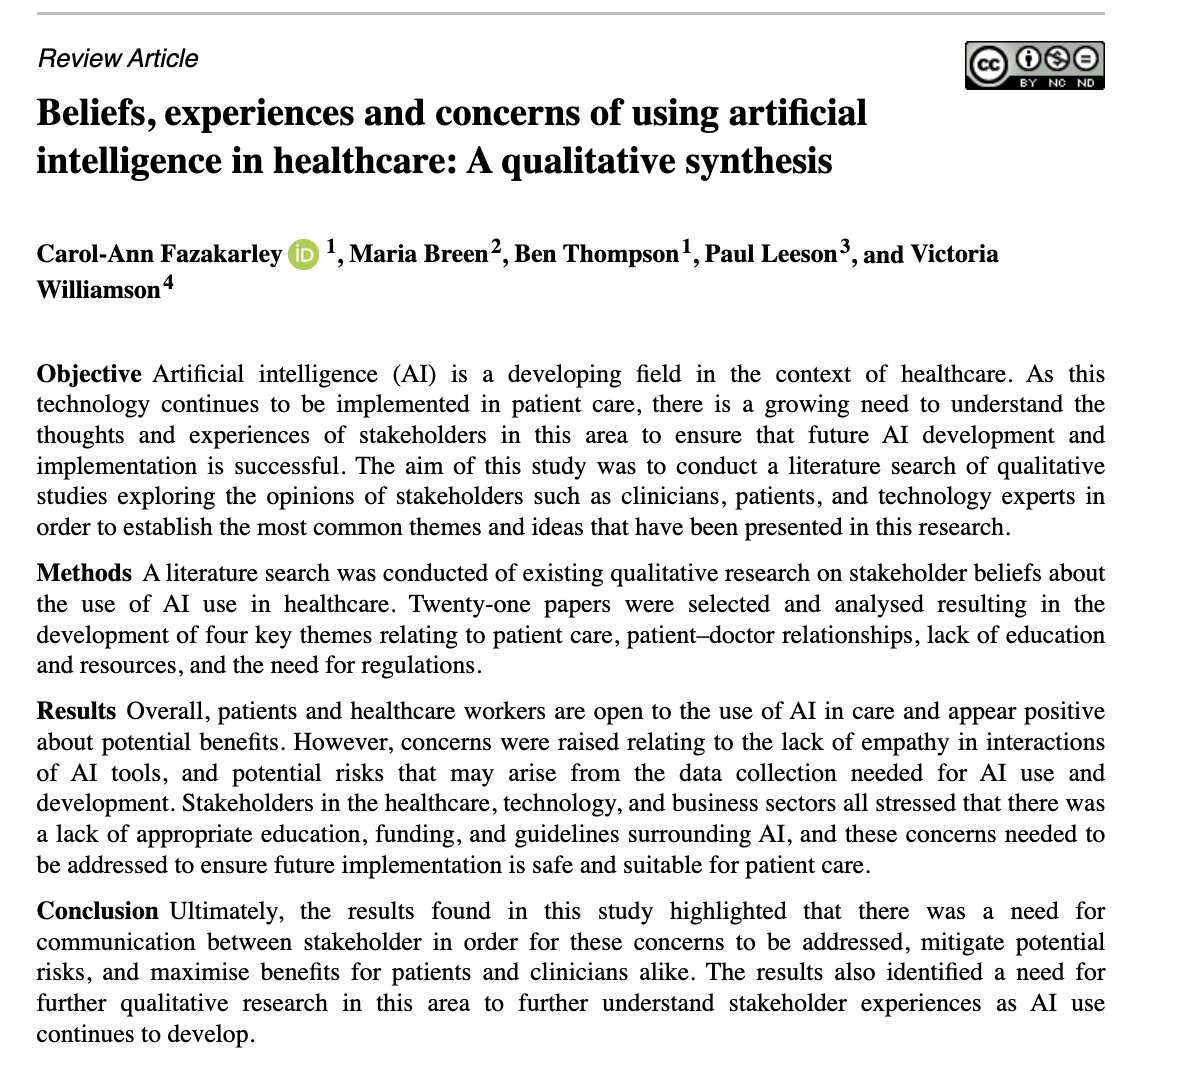 As AI increasingly is used in healthcare, our newest review looks at the experiences and concerns of key stakeholders in using AI in healthcare. Read it here - journals.sagepub.com/doi/10.1177/20… @DigitalHealthJ @ultromics